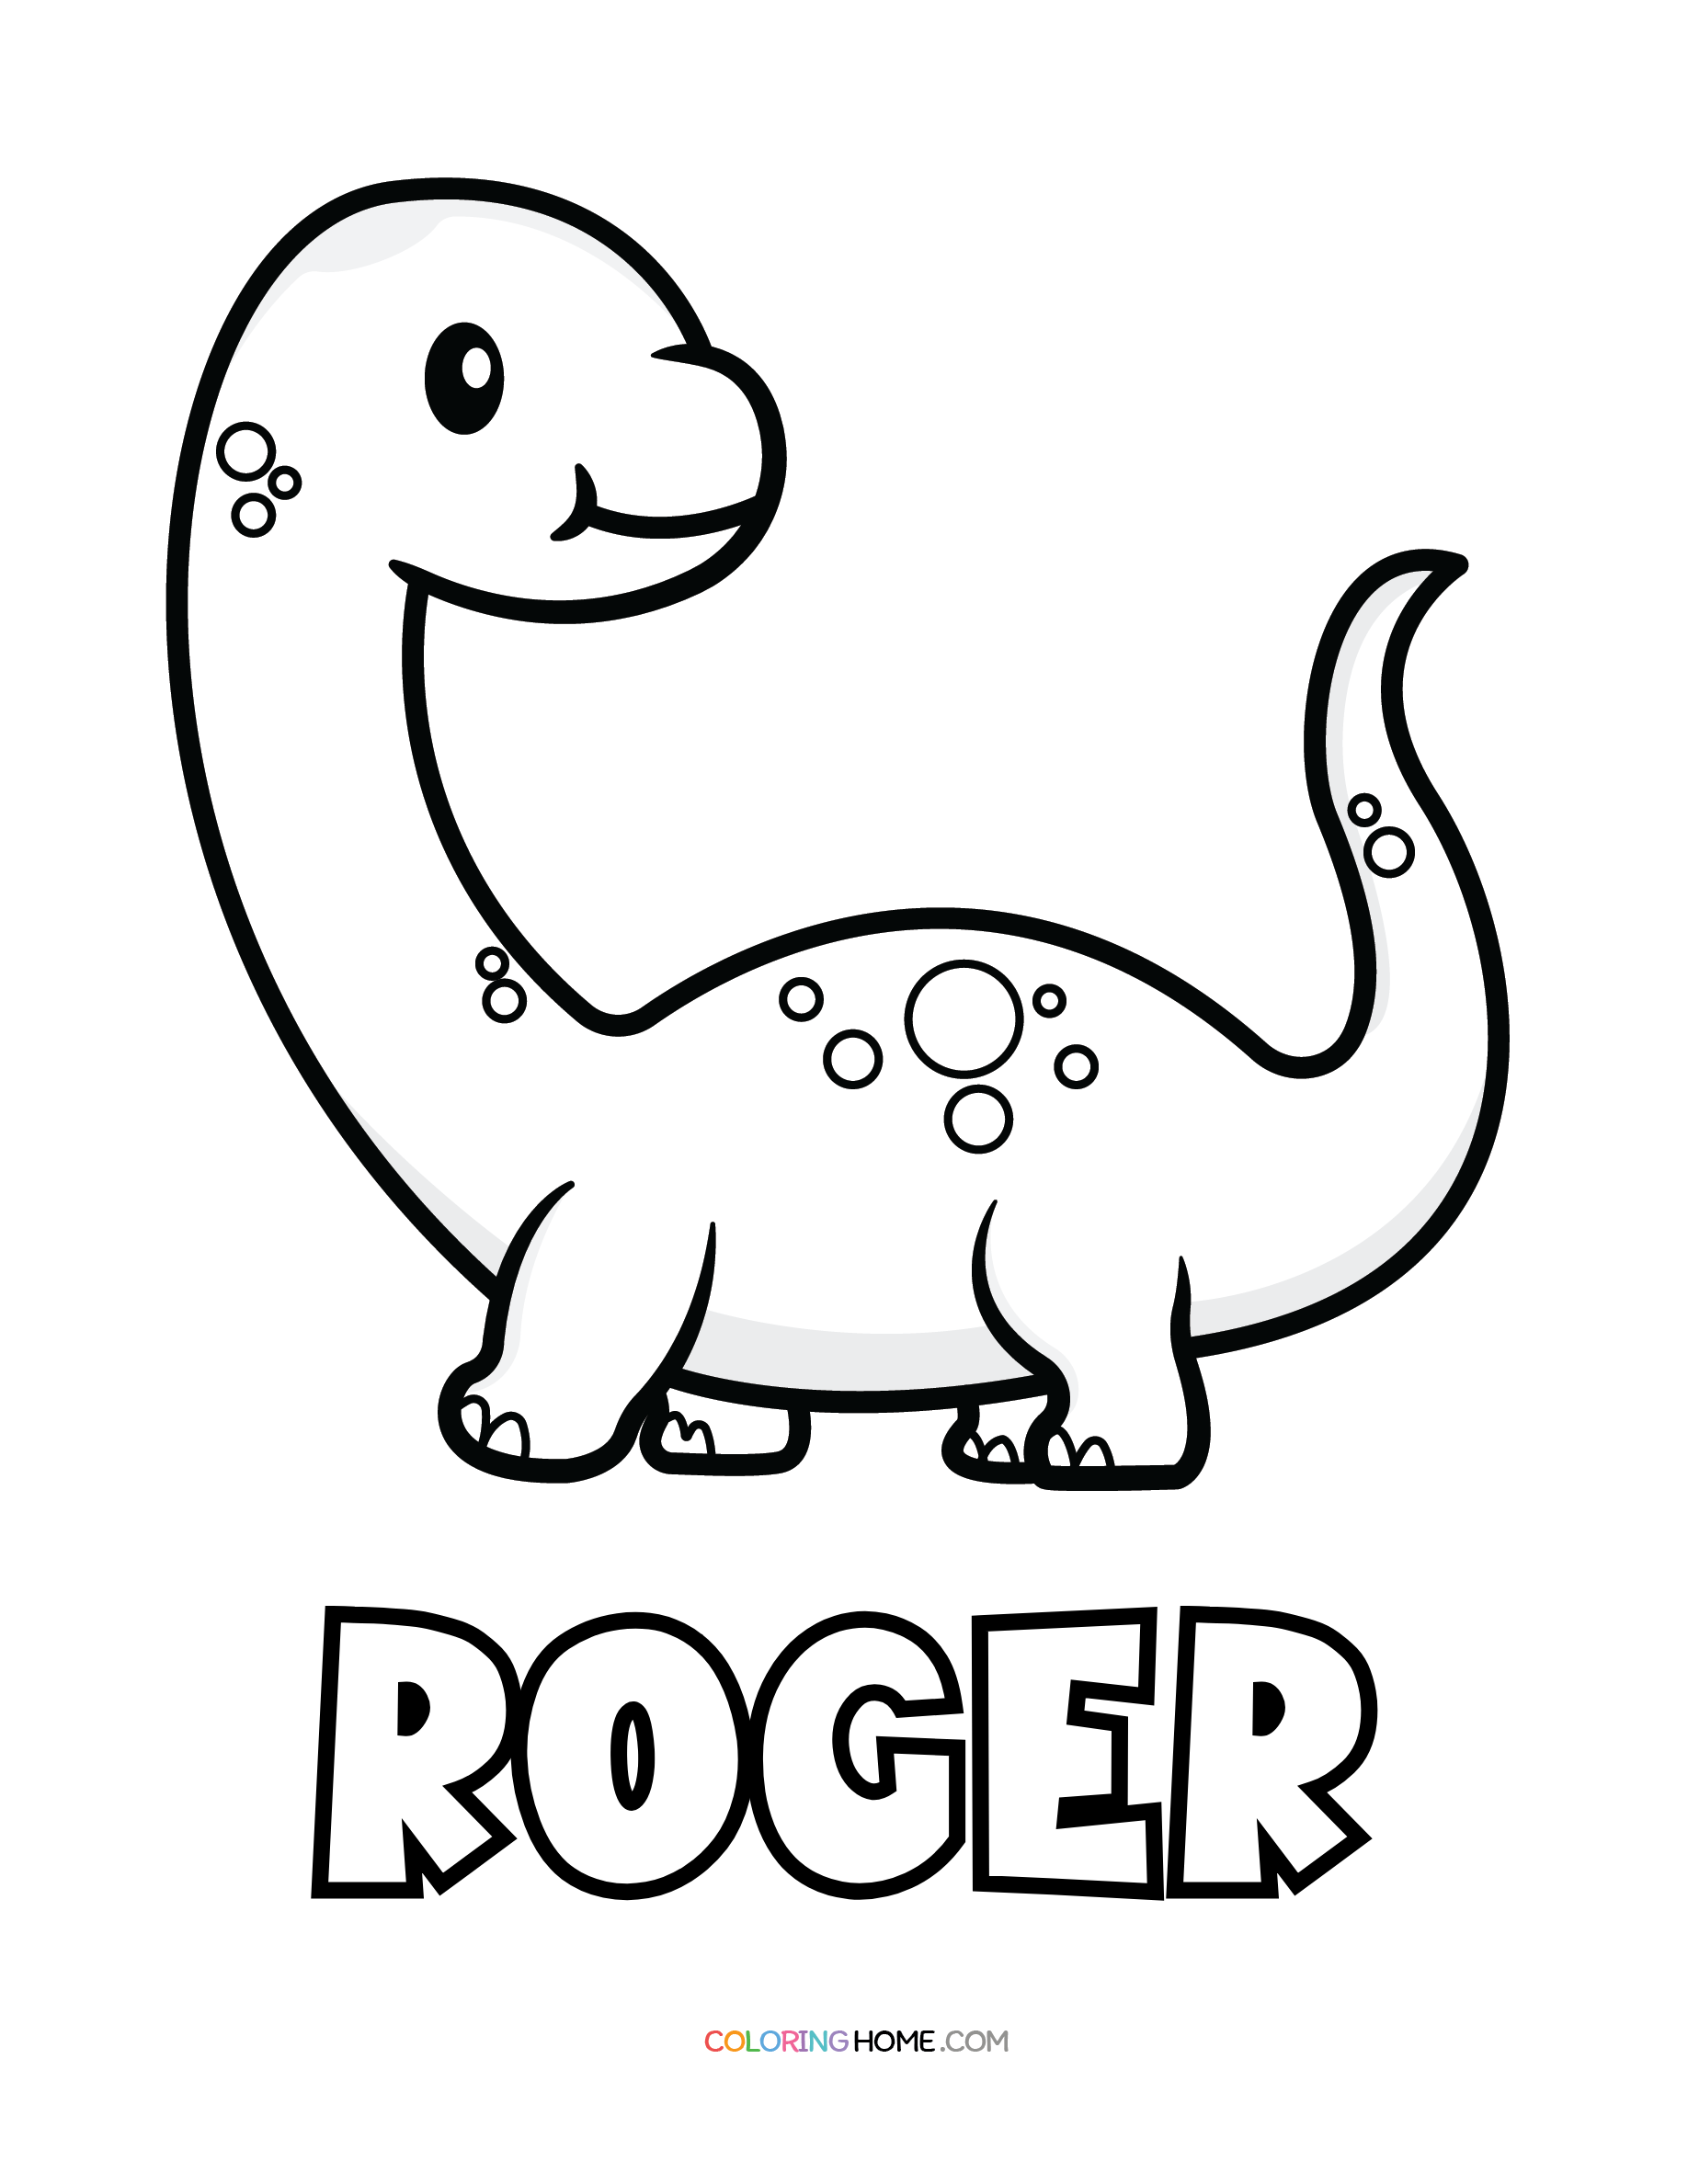 Roger dinosaur coloring page